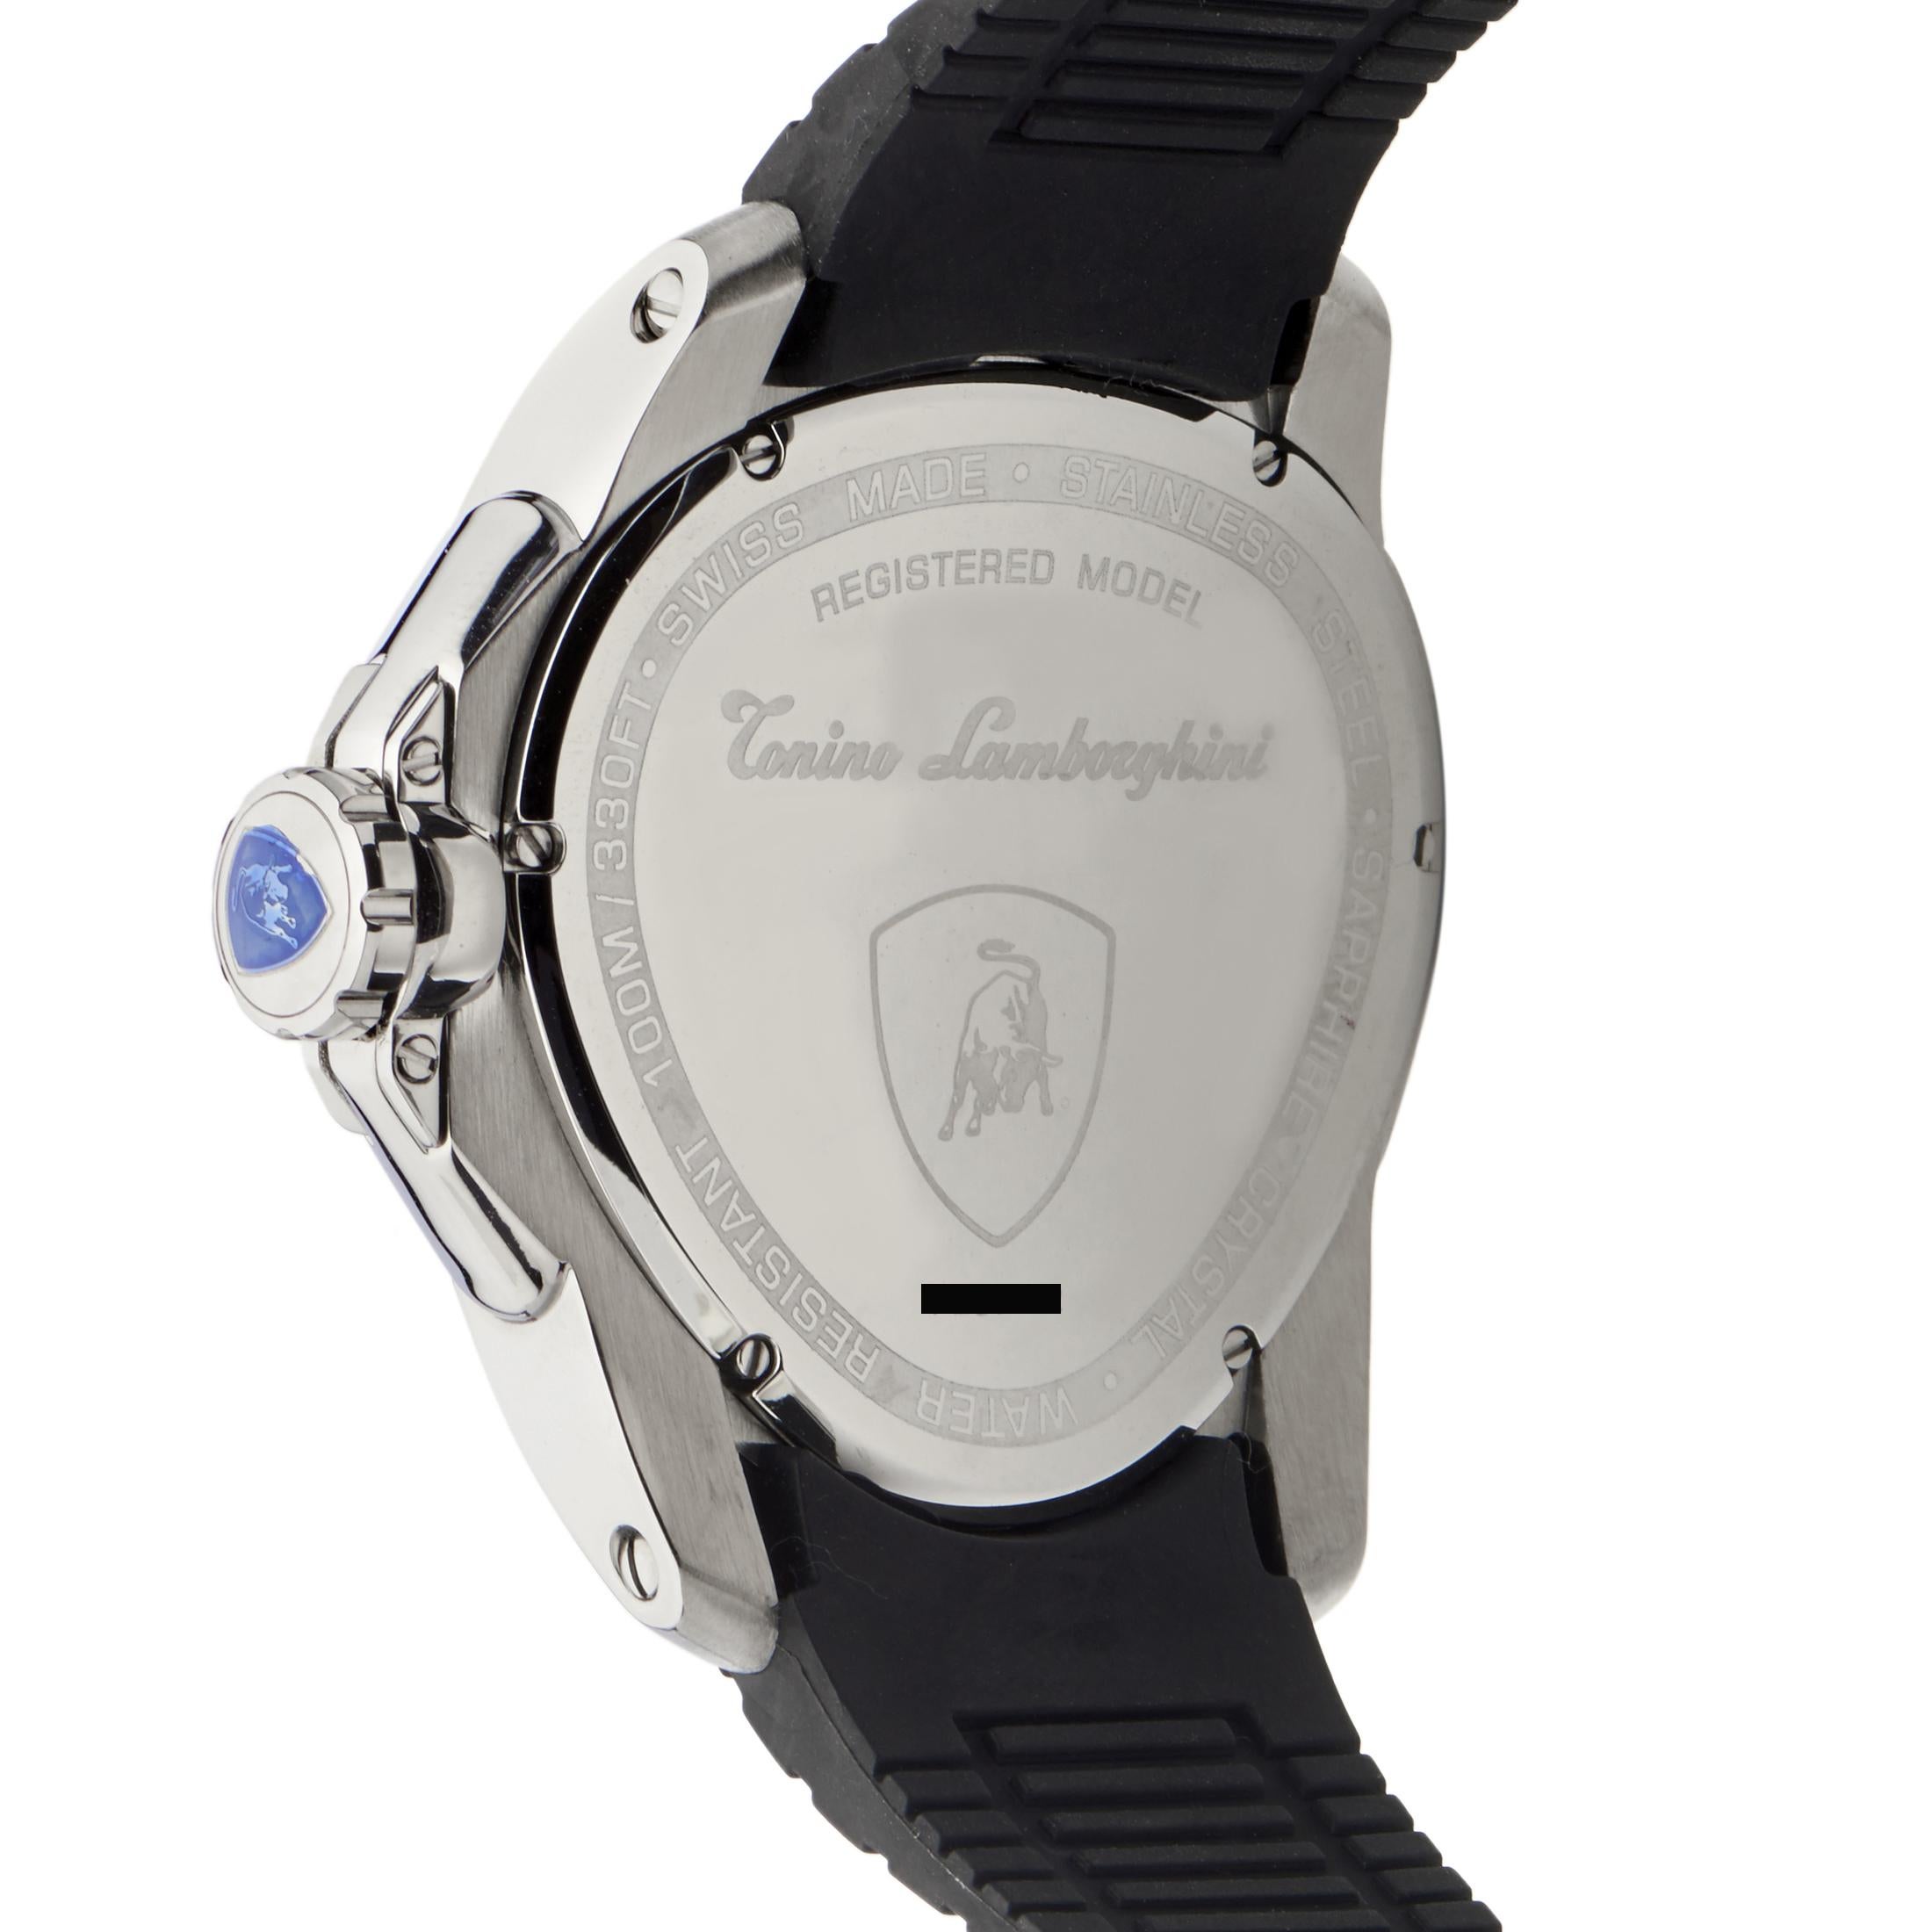 A design that exudes mechanical prowess and a fitting tribute to the amazing automotive achievements of the Lamborghini family, this striking timepiece from Tonino Lamborghini boasts recognizable design codes and decorative symbols which constitute